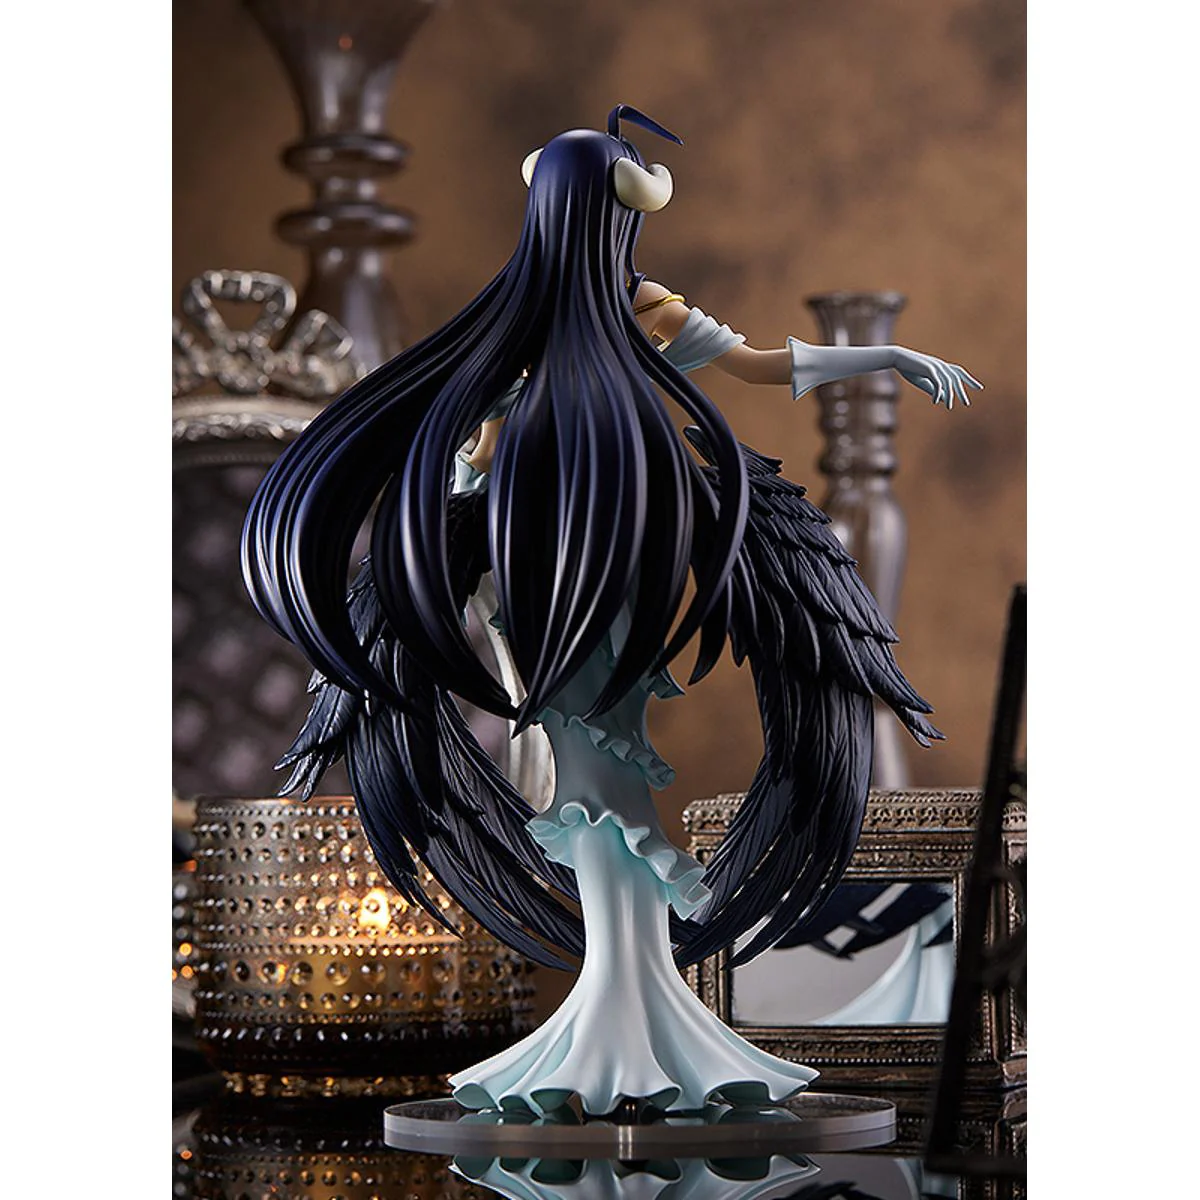 GSC POP UP PARADE OverLord IV Albedo Figure (Japan Ver.)